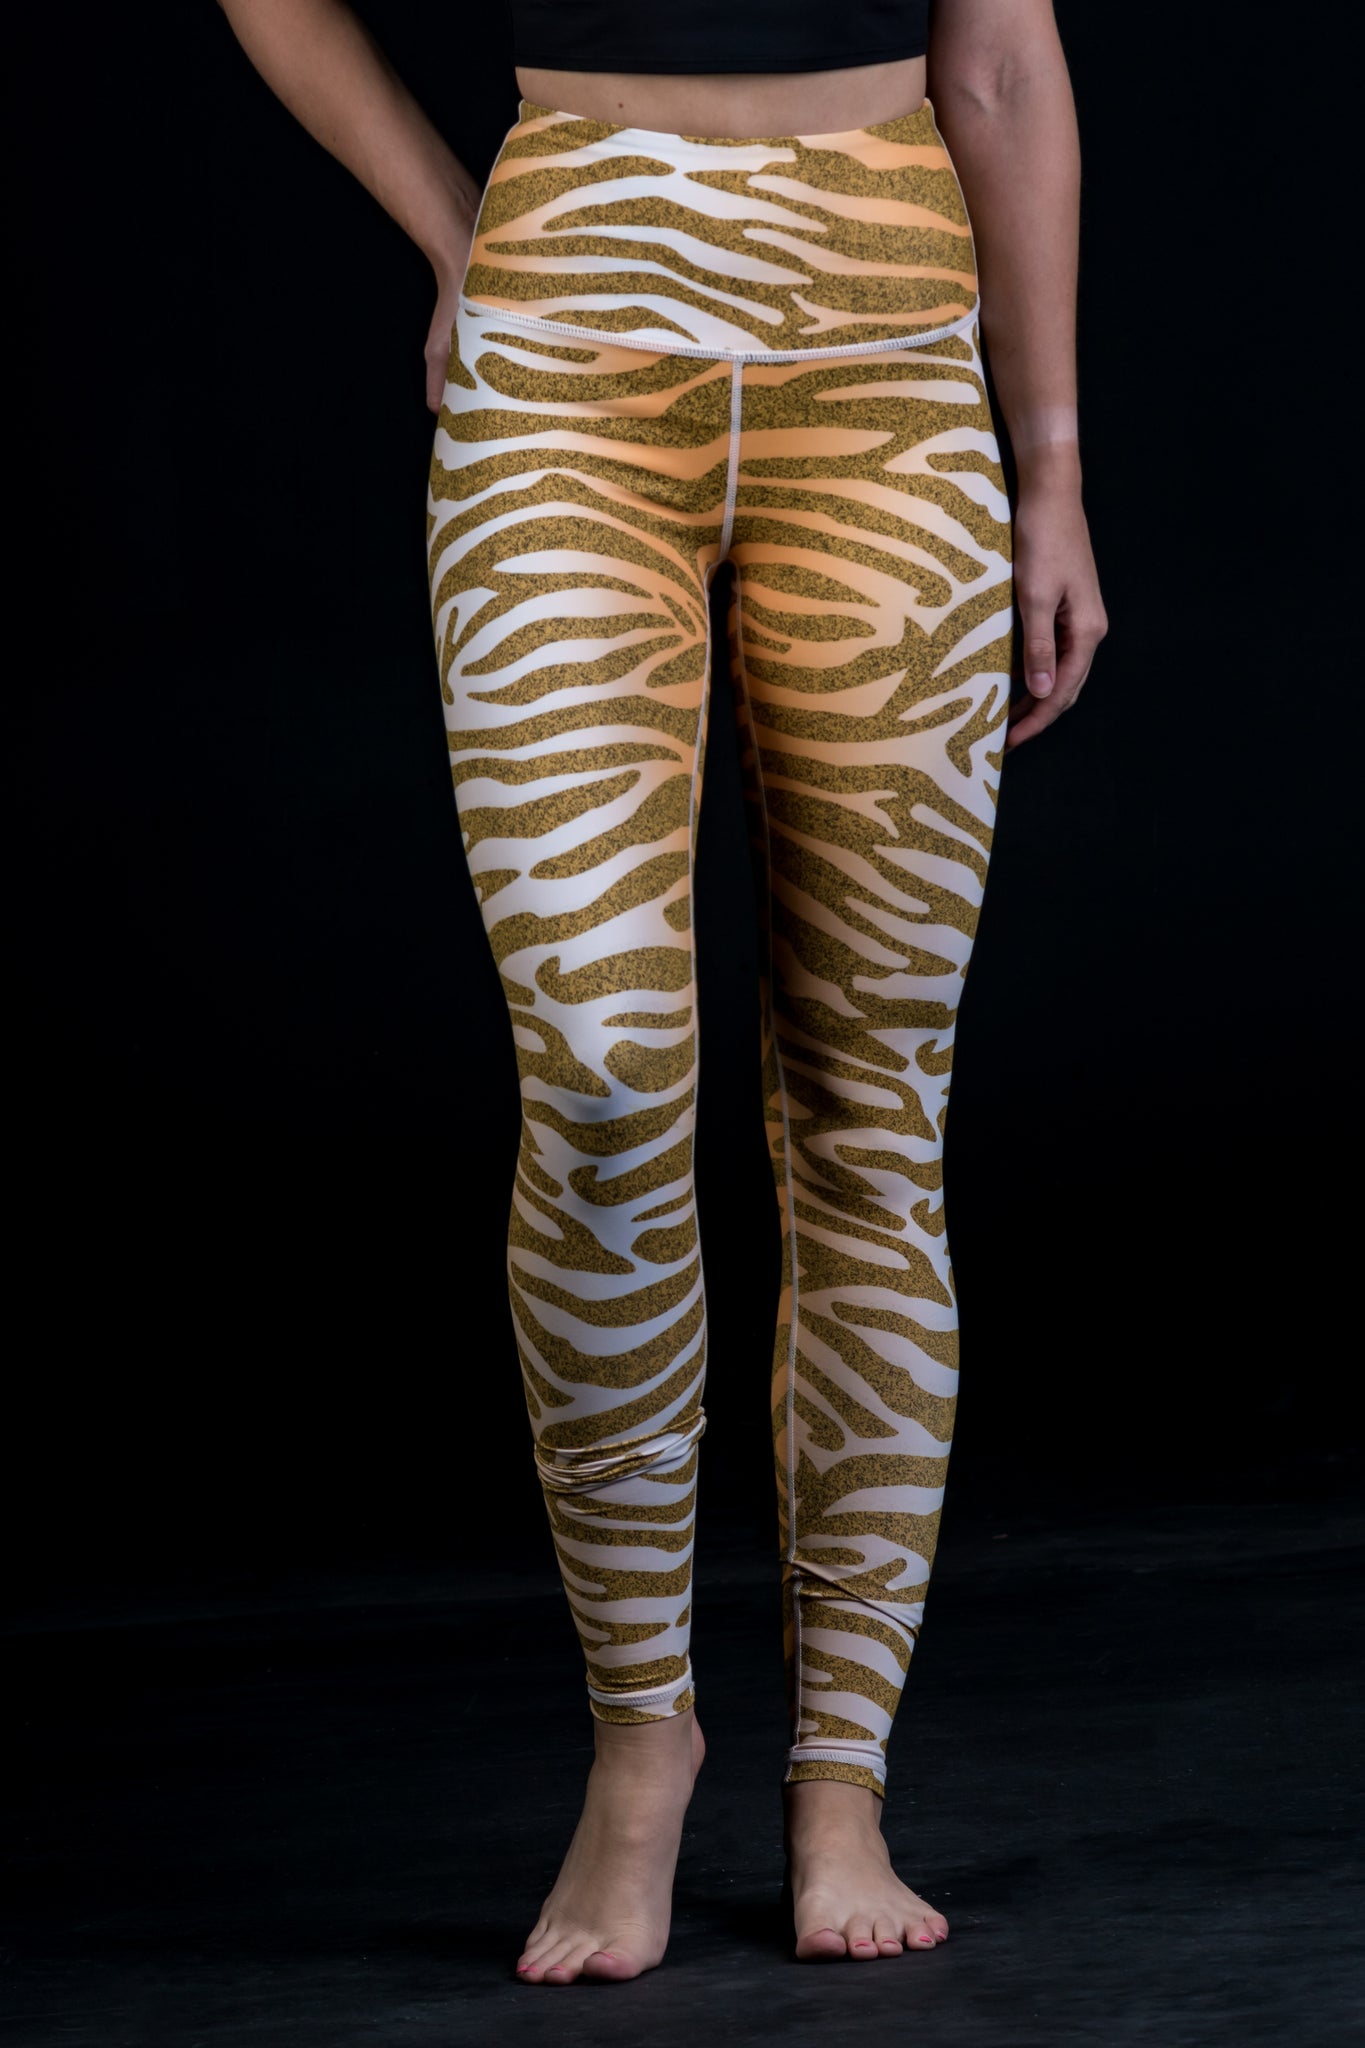 Zohra Animal Print High Waist Tiger Leggings For Women Sexy Splicing Design,  Fashionable And Slim Fit Fitness Pants From Mu04, $11.4